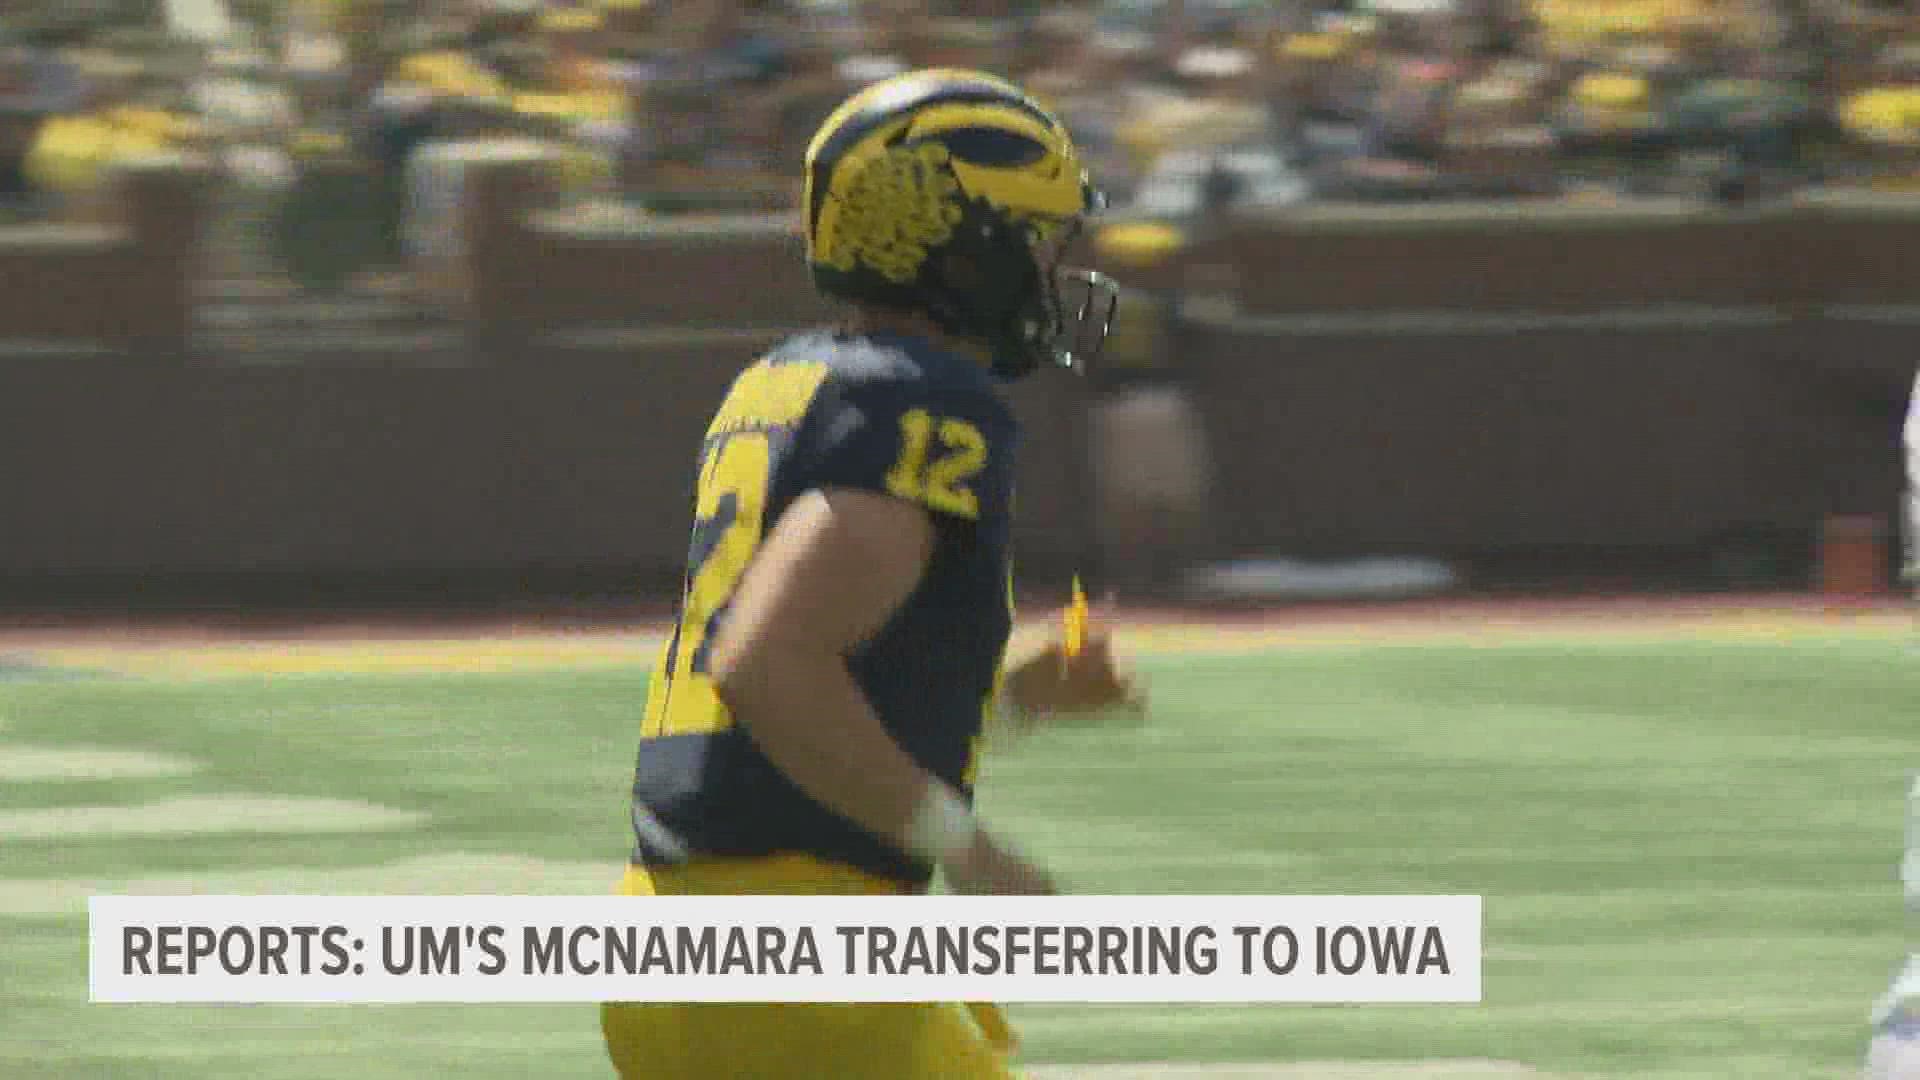 After it was announced that McNamara was entering the transfer portal, reports soon followed that he would be transferring to Iowa.